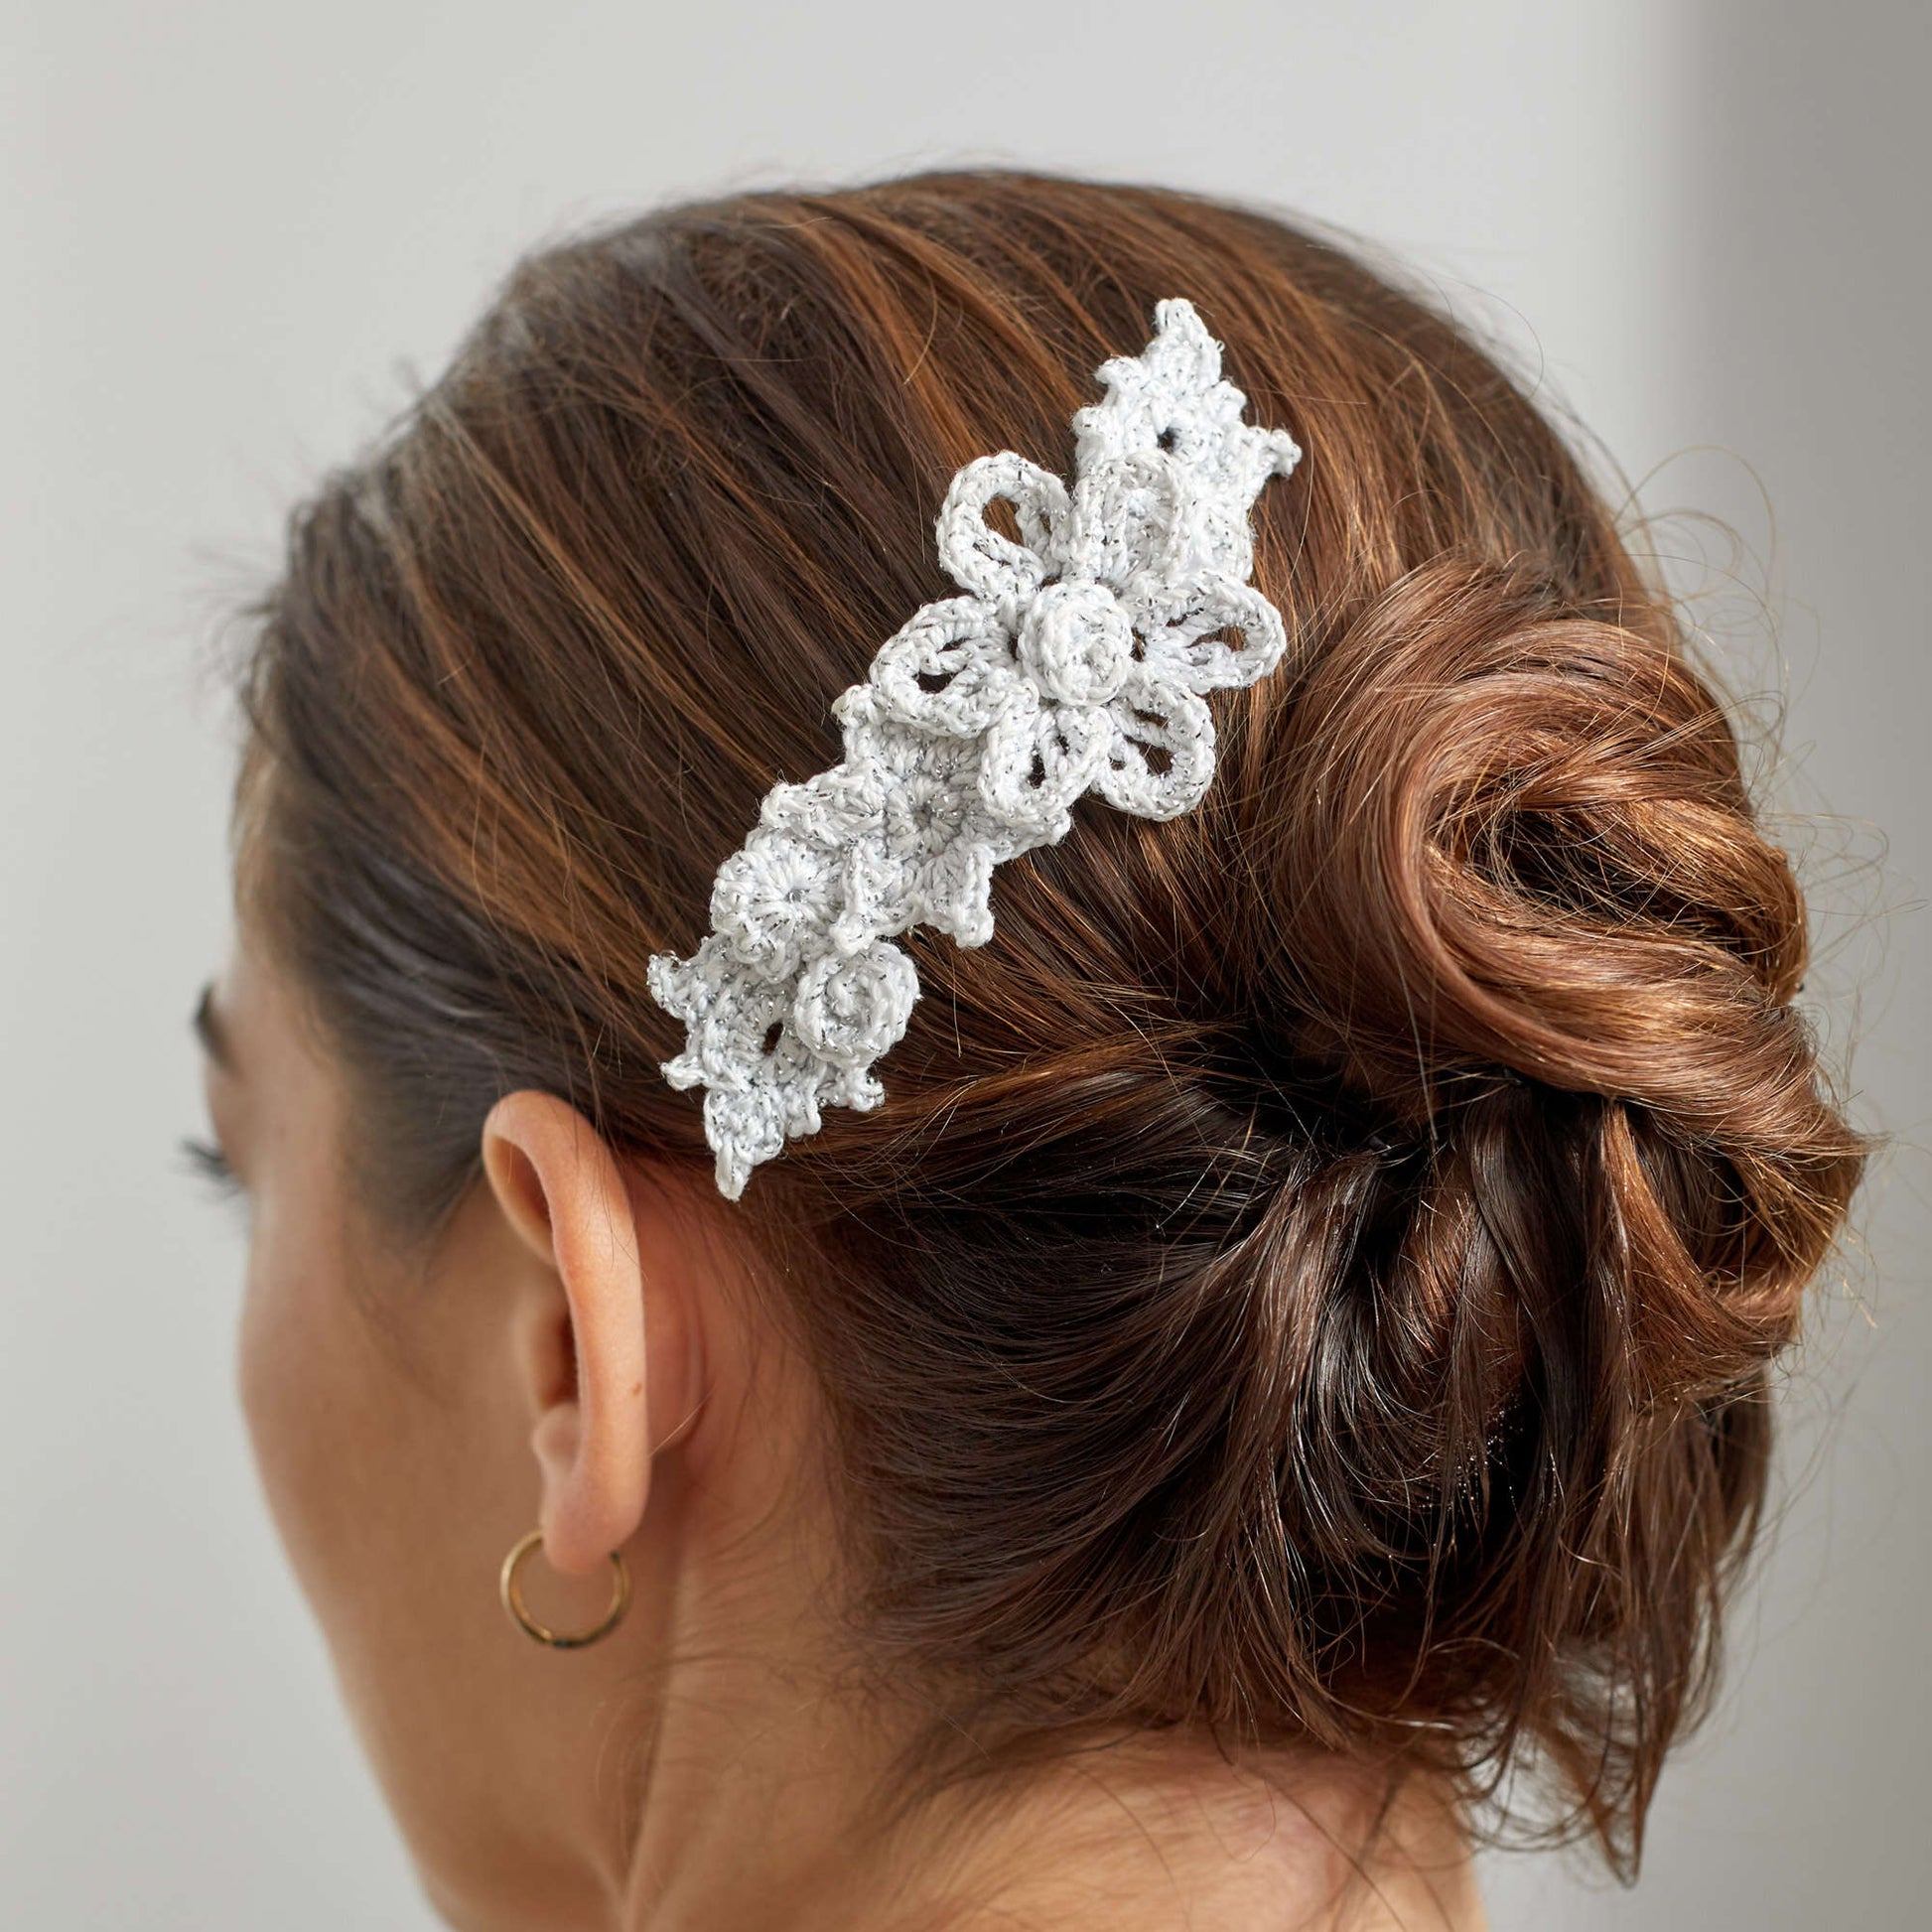 Free Aunt Lydia's Floral Hair Comb Crochet Pattern